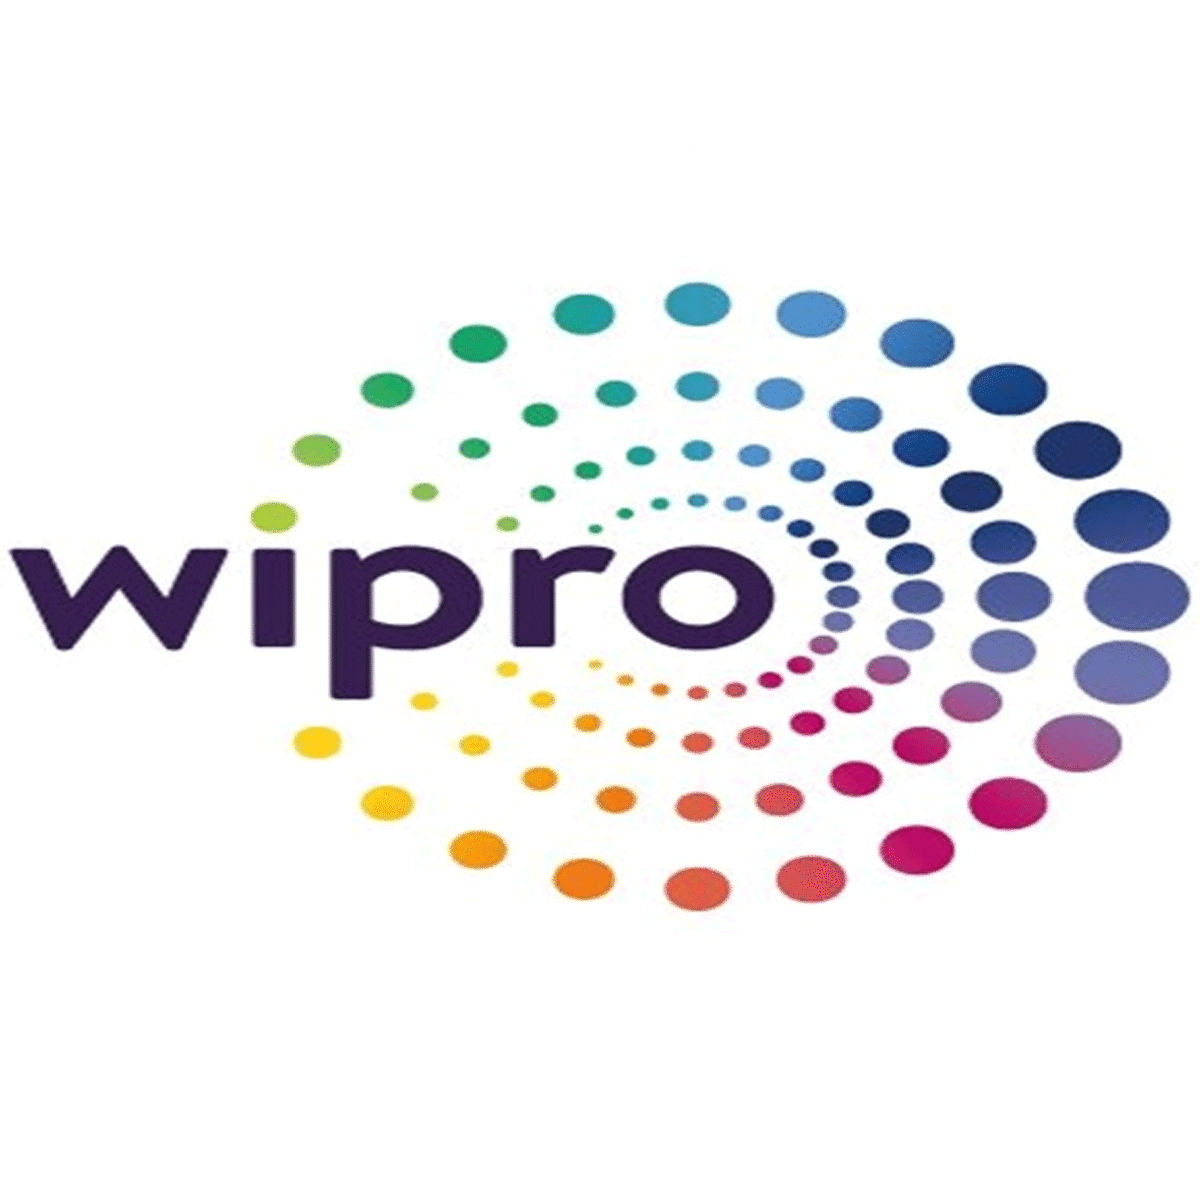 As Wipro CEO steps down, search is on for successor